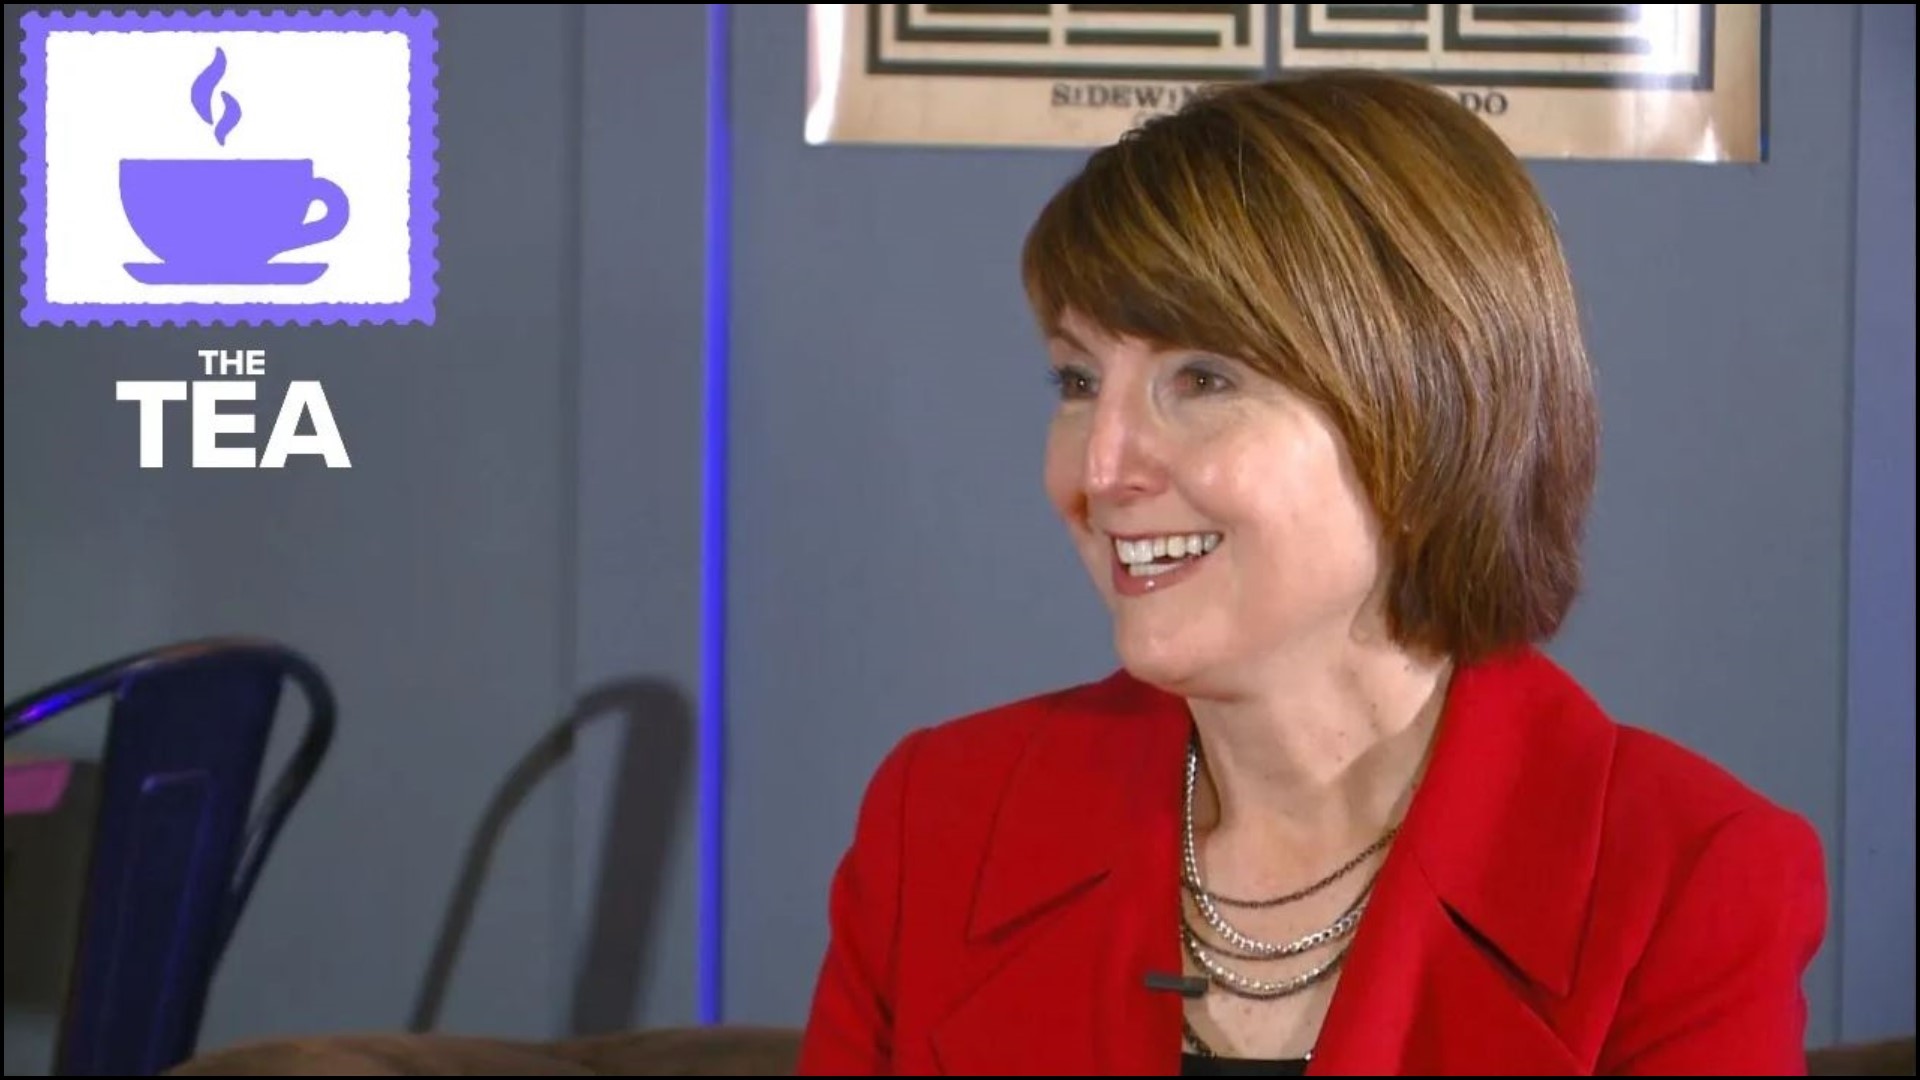 Cathy McMorris Rodgers is running for US Representative for Washington state. We spoke with her over tea about what she would bring to the position.